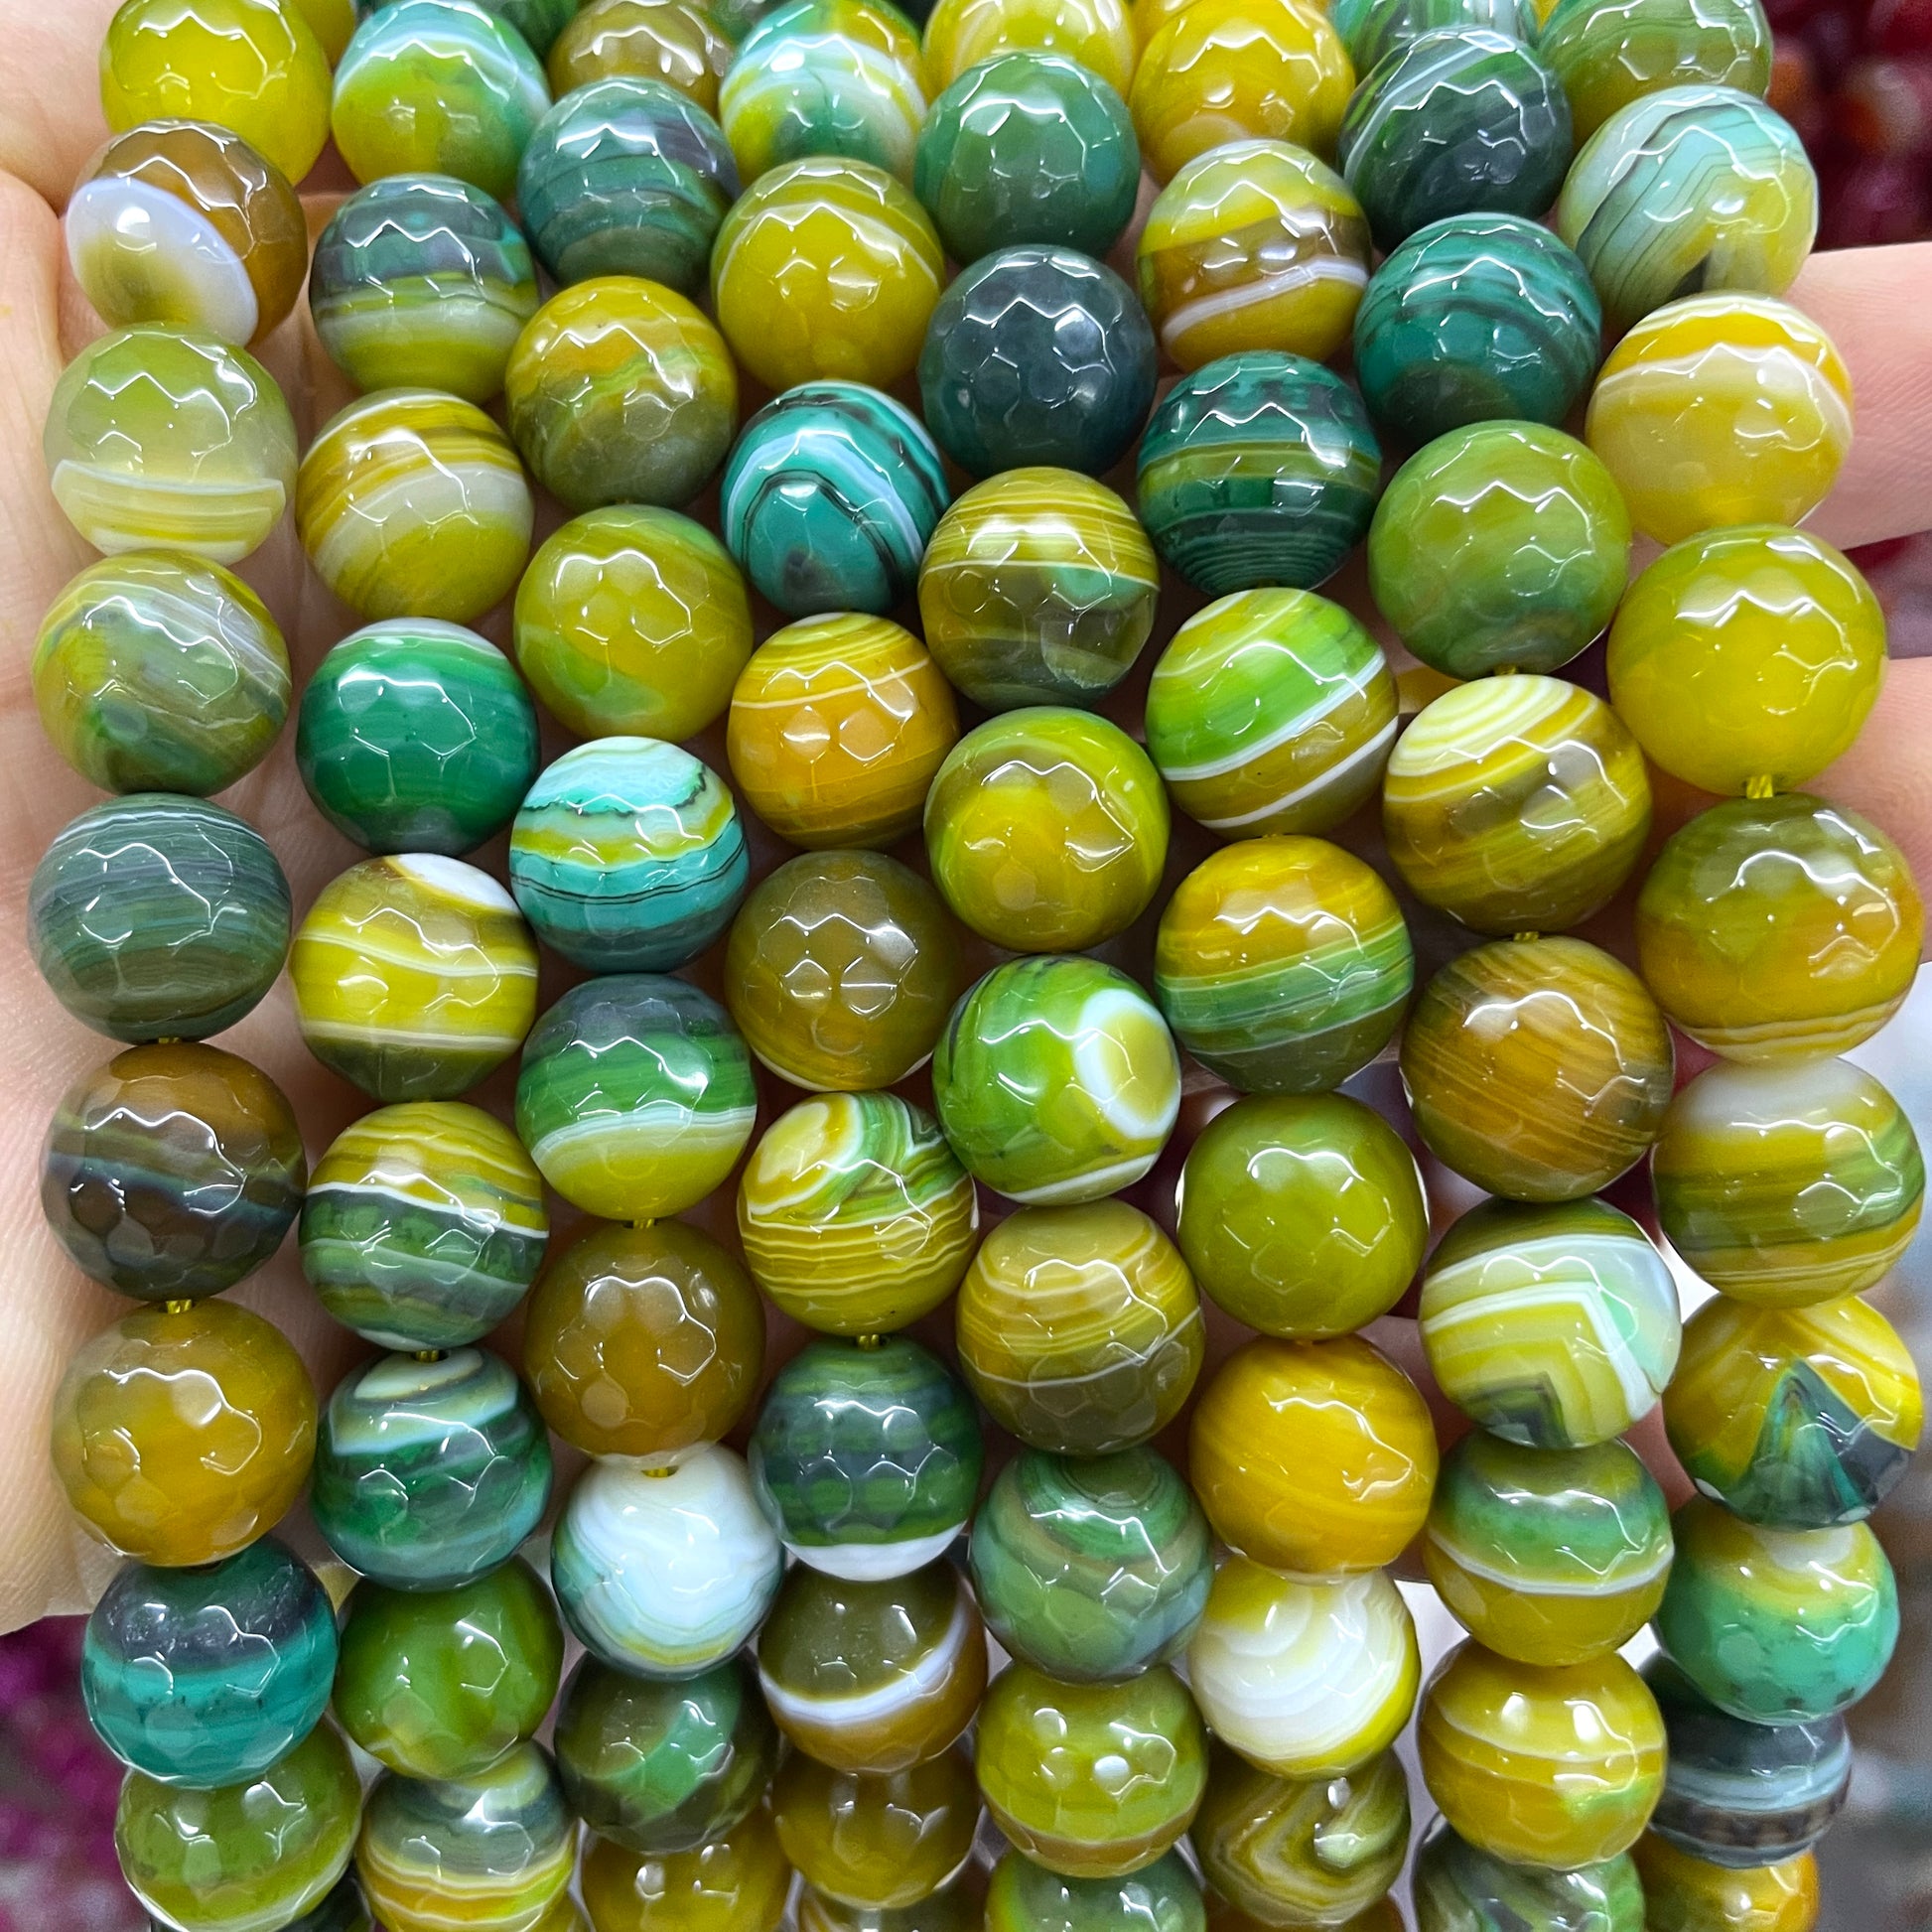 2 Strands/lot 10mm,12mm Green Yellow Banded Agate Faceted Stone Beads Stone Beads 12mm Stone Beads Faceted Agate Beads New Beads Arrivals Charms Beads Beyond